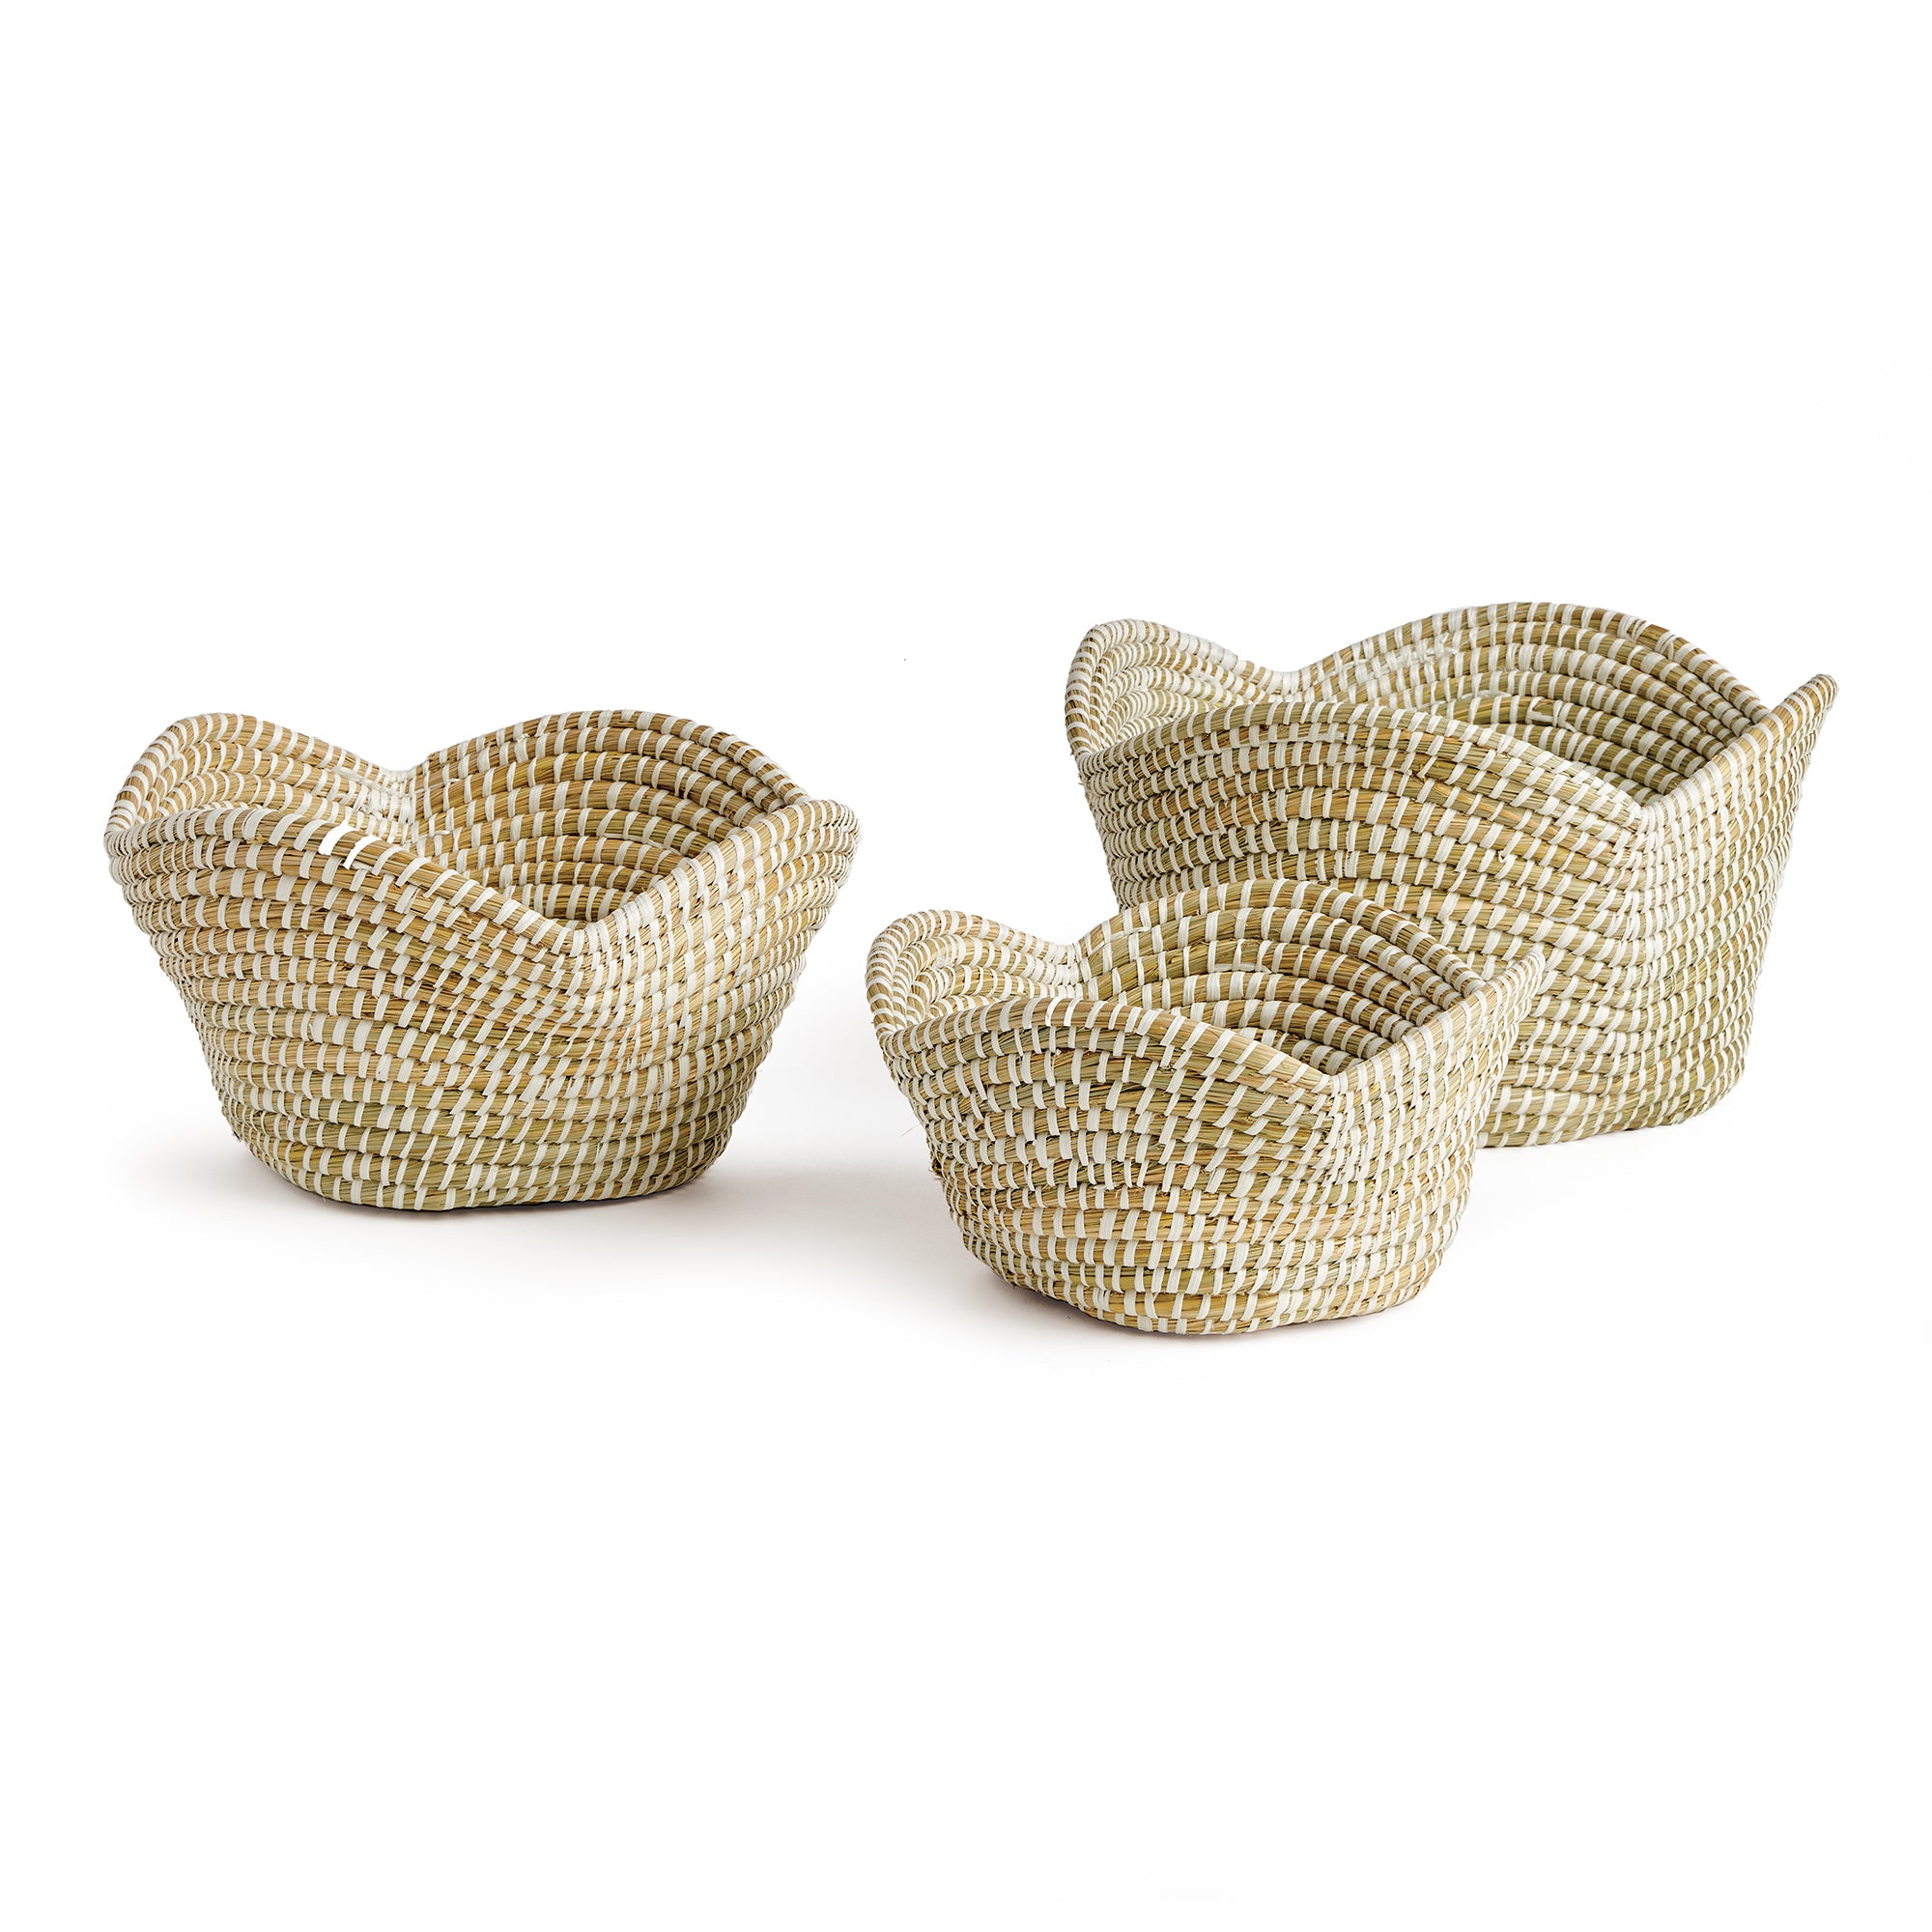 These well-scaled all natural baskets are hand-woven by skilled artisans using sustainable materials. With sculpted petal-like rims, they are just perfect for creating that spa-inspired look for home or office. Amethyst Home provides interior design, new construction, custom furniture, and area rugs in the Portland metro area.